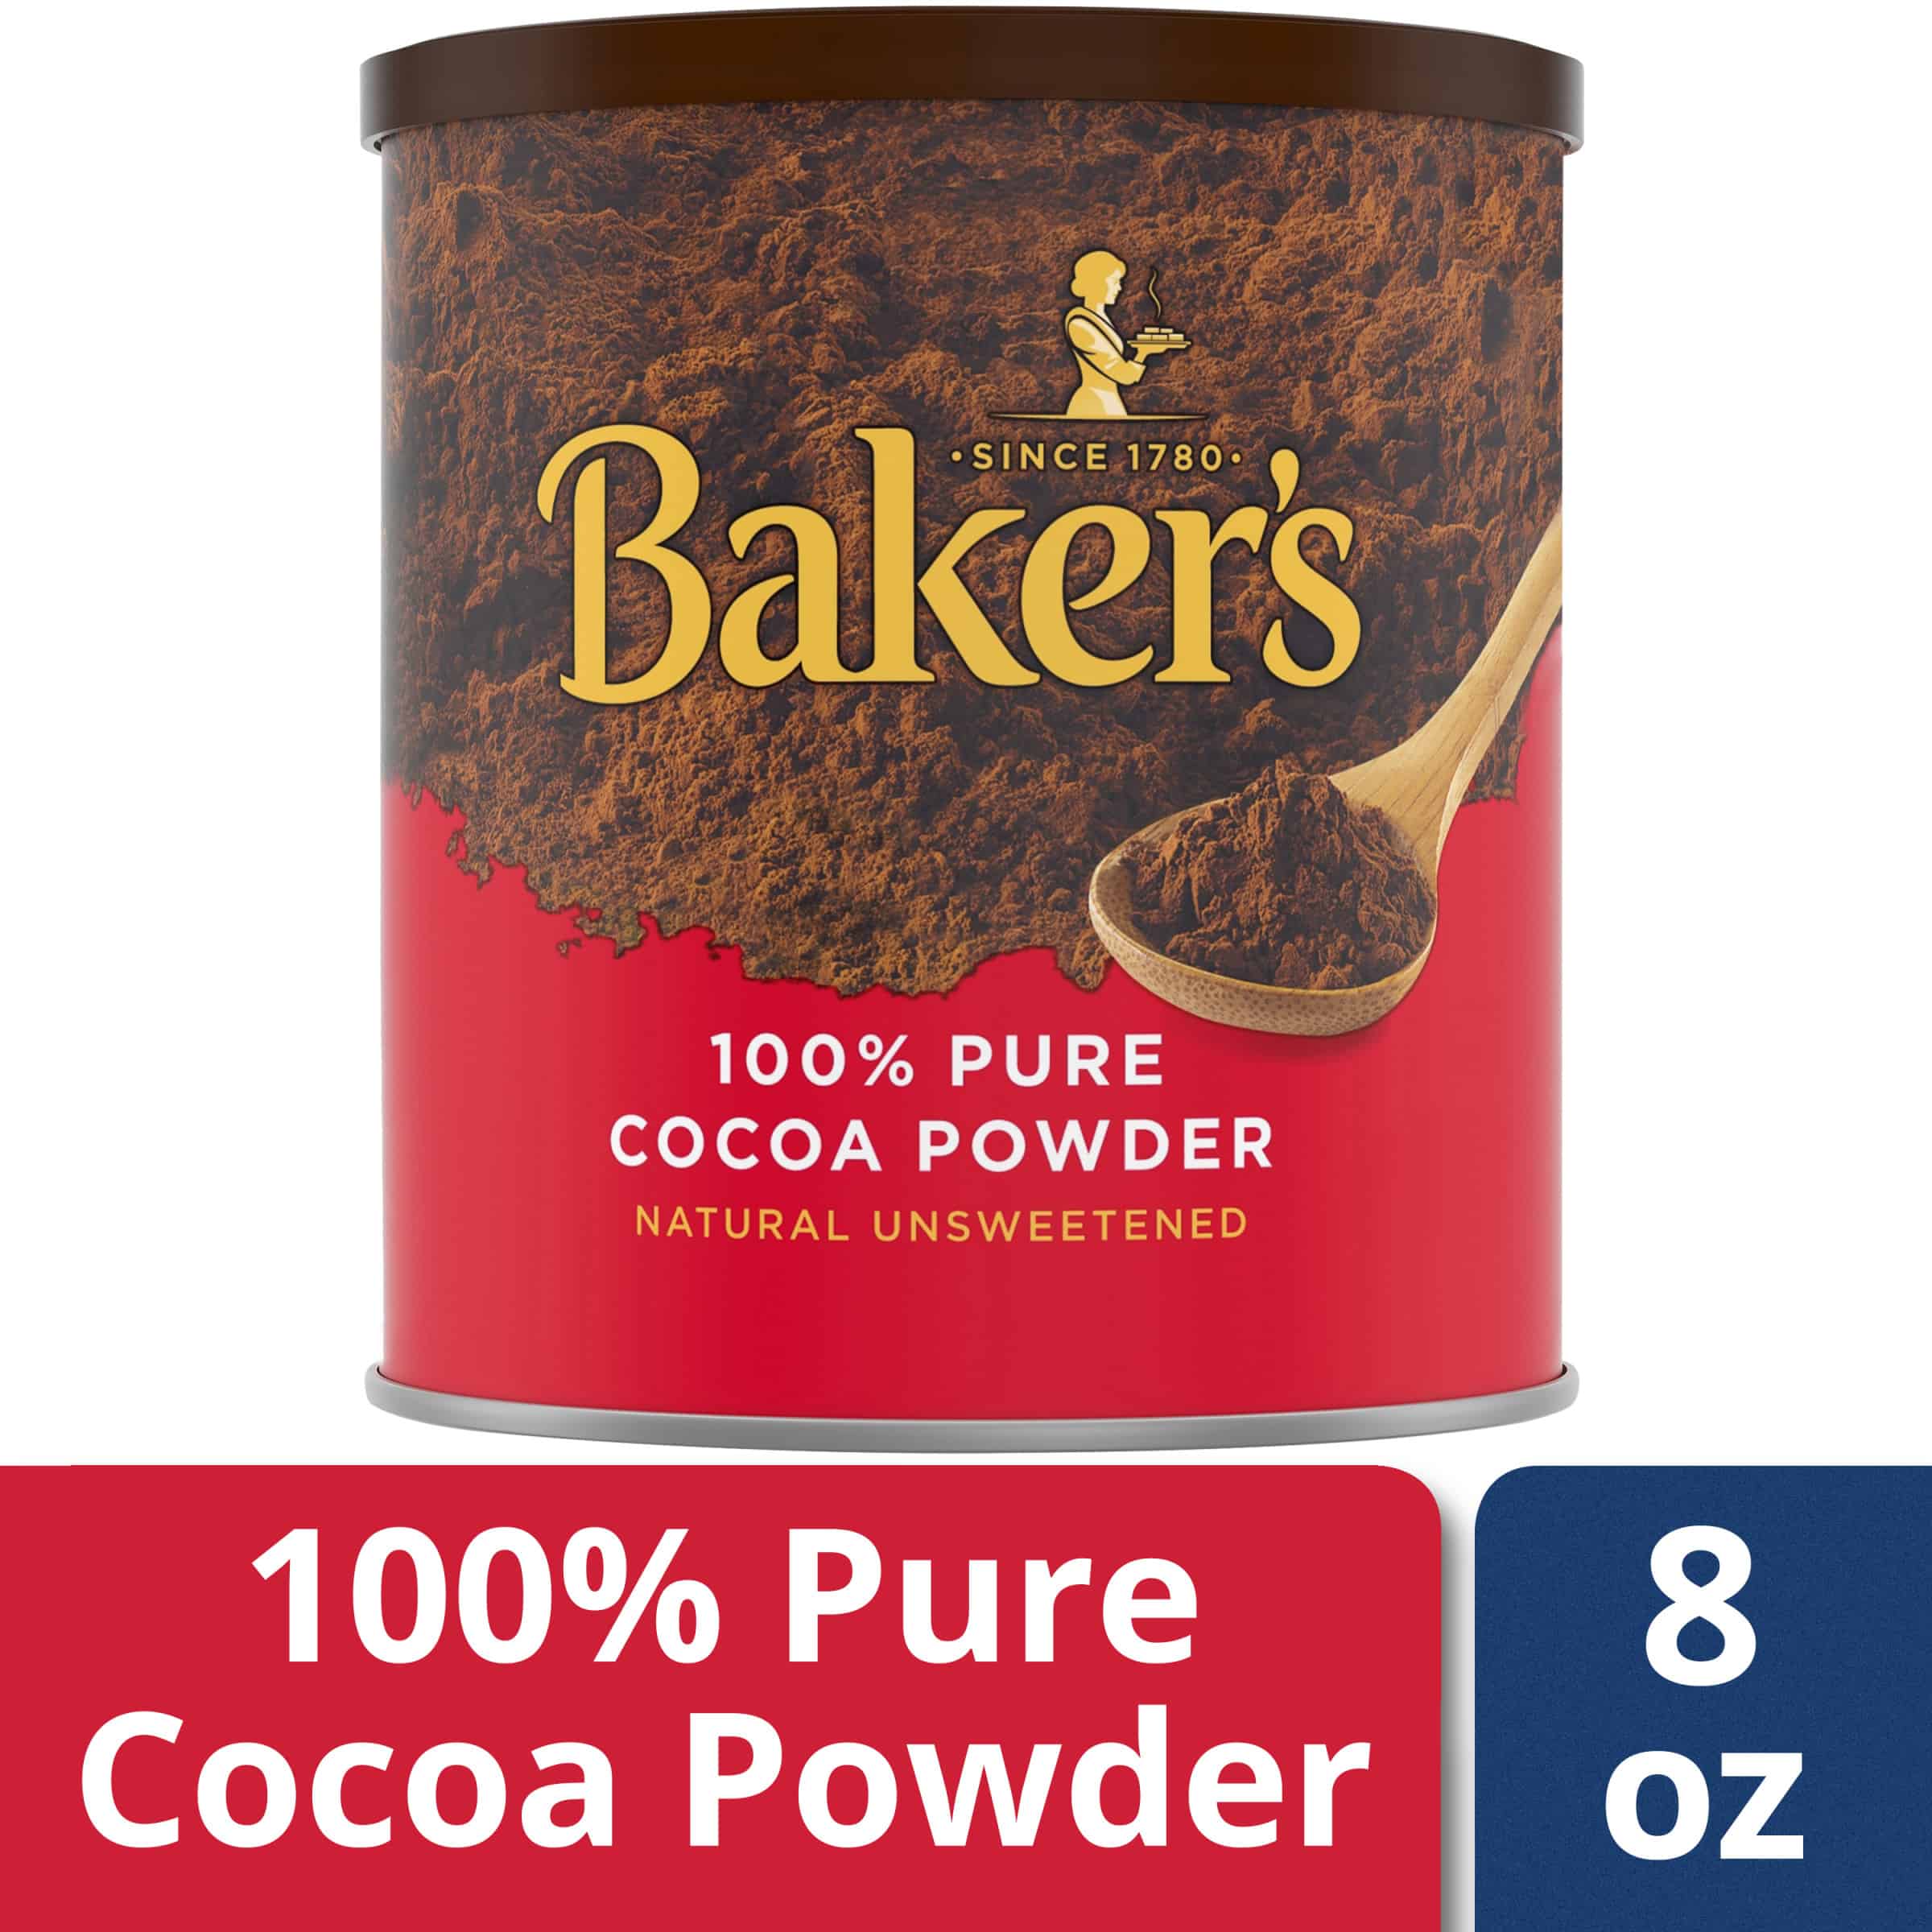 Baker's Cocoa Powder, Natural Unsweetened 100% Pure Cocoa, 8 oz Can